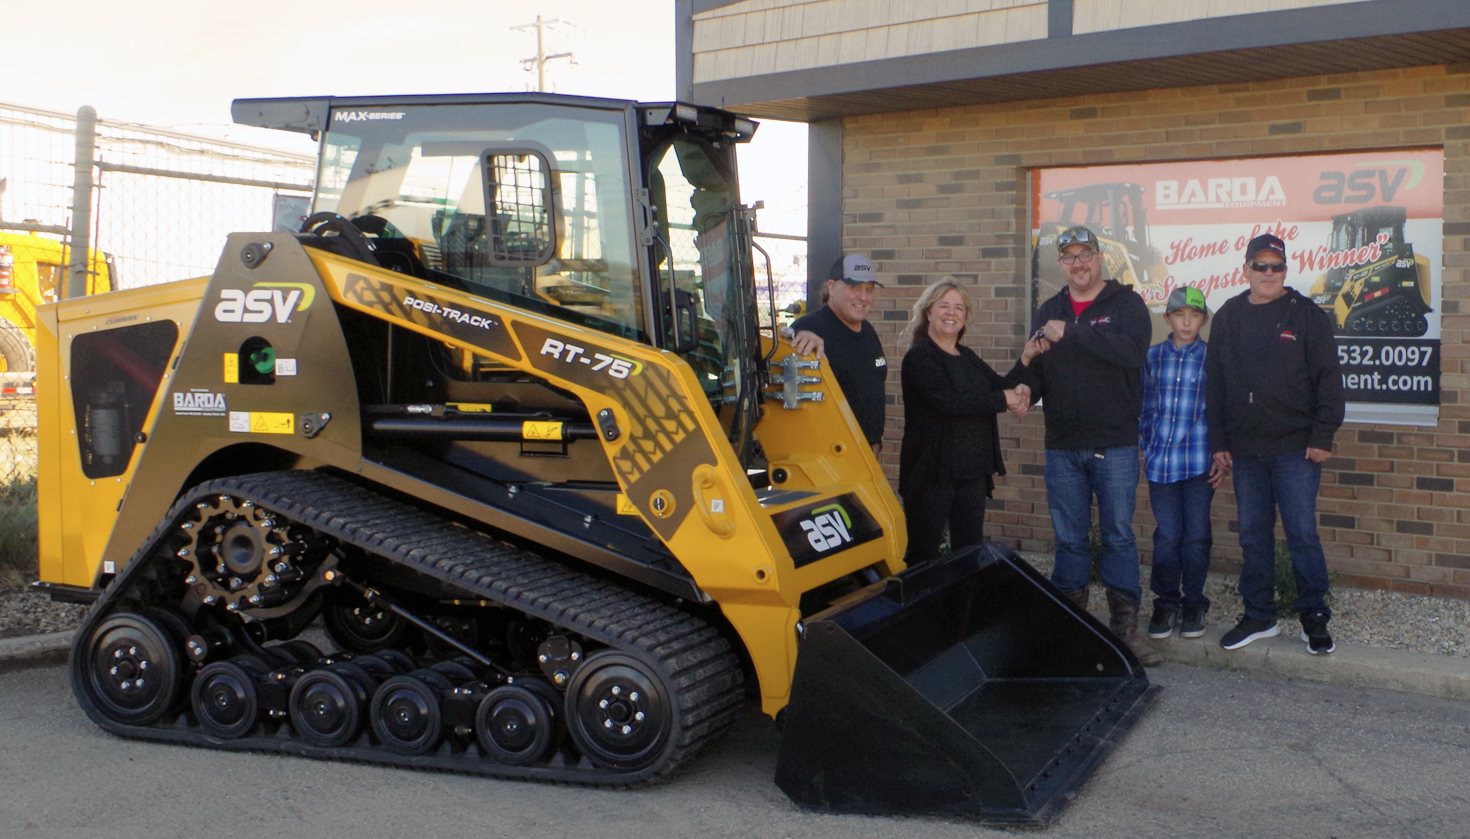 Andrew Stewart, co-owner of Redneks Field Services in Wembley, Alberta, Canada, is the winner of a 1-year lease of a MAX-Series RT-75 Posi-Track® loader.